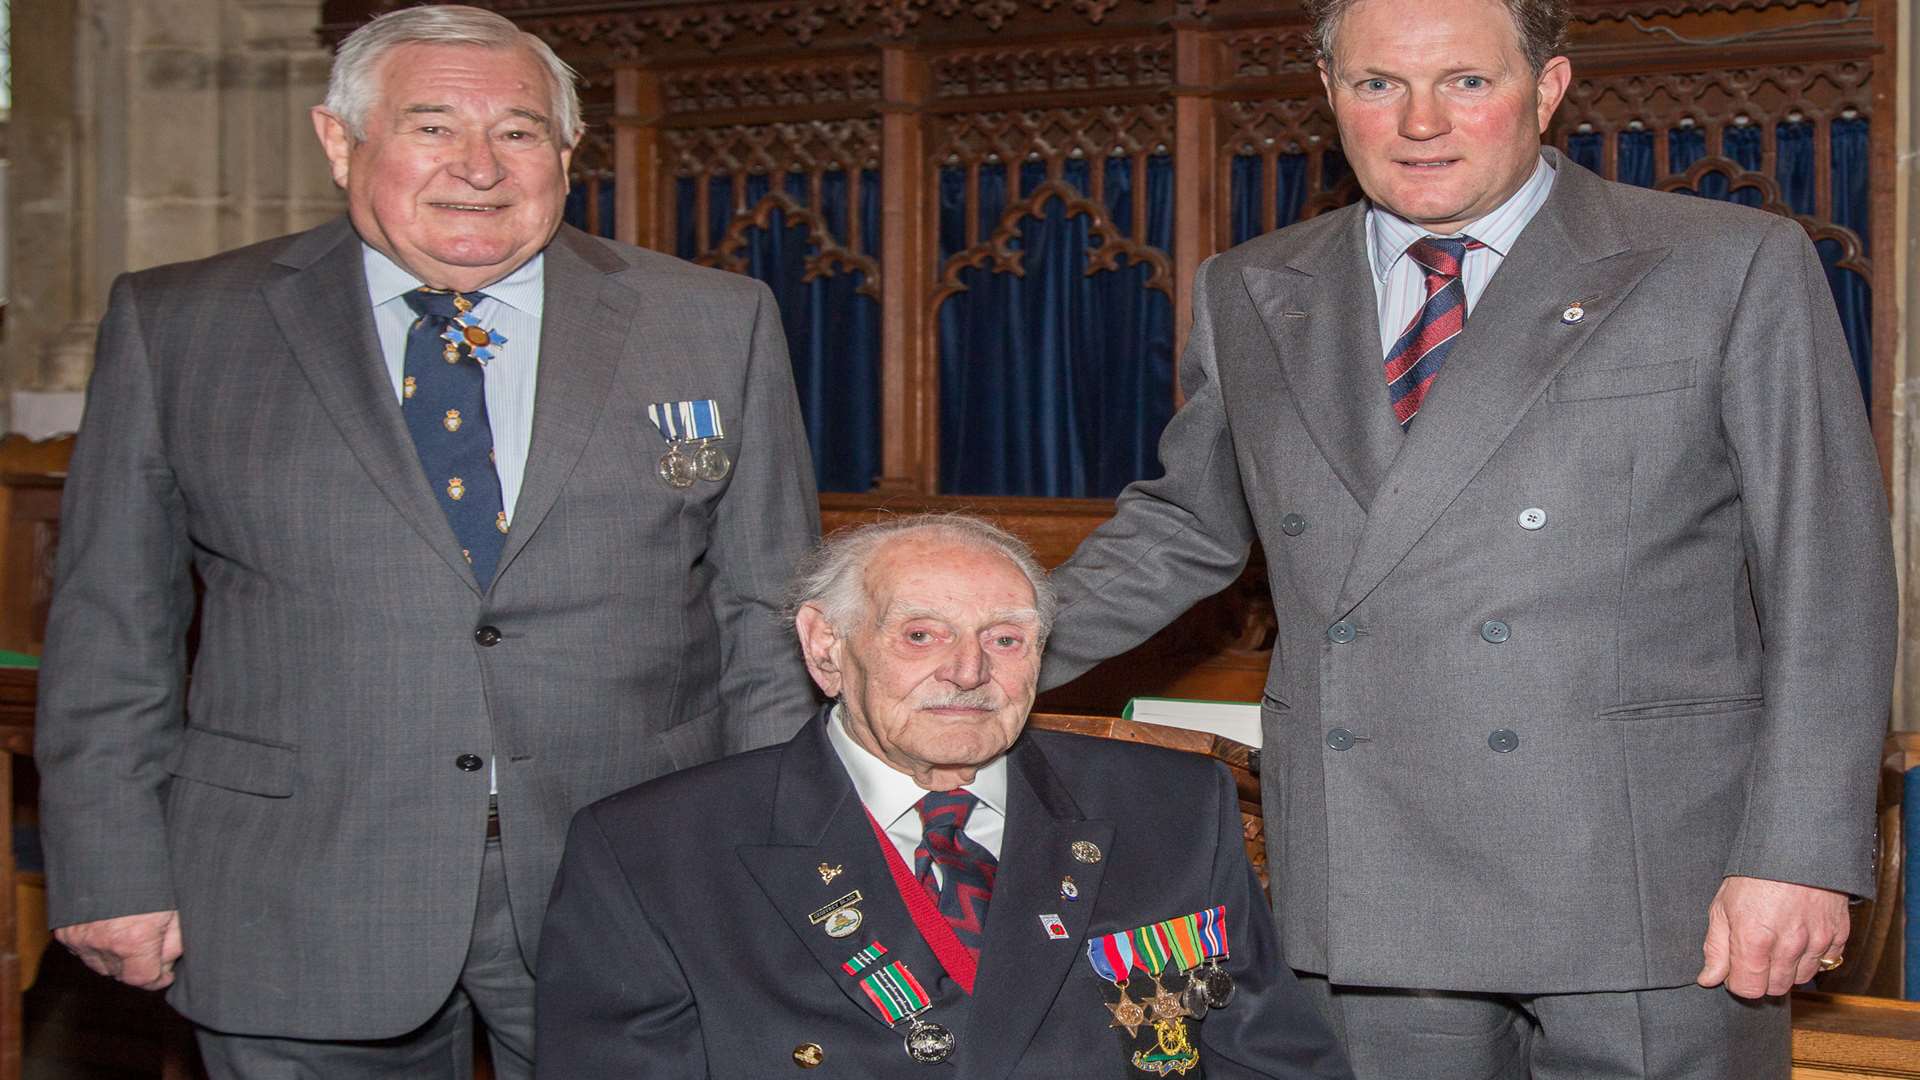 Veteran Geoffrey Blain, 94, was presented with replacement medals at a church service in Rolvenden